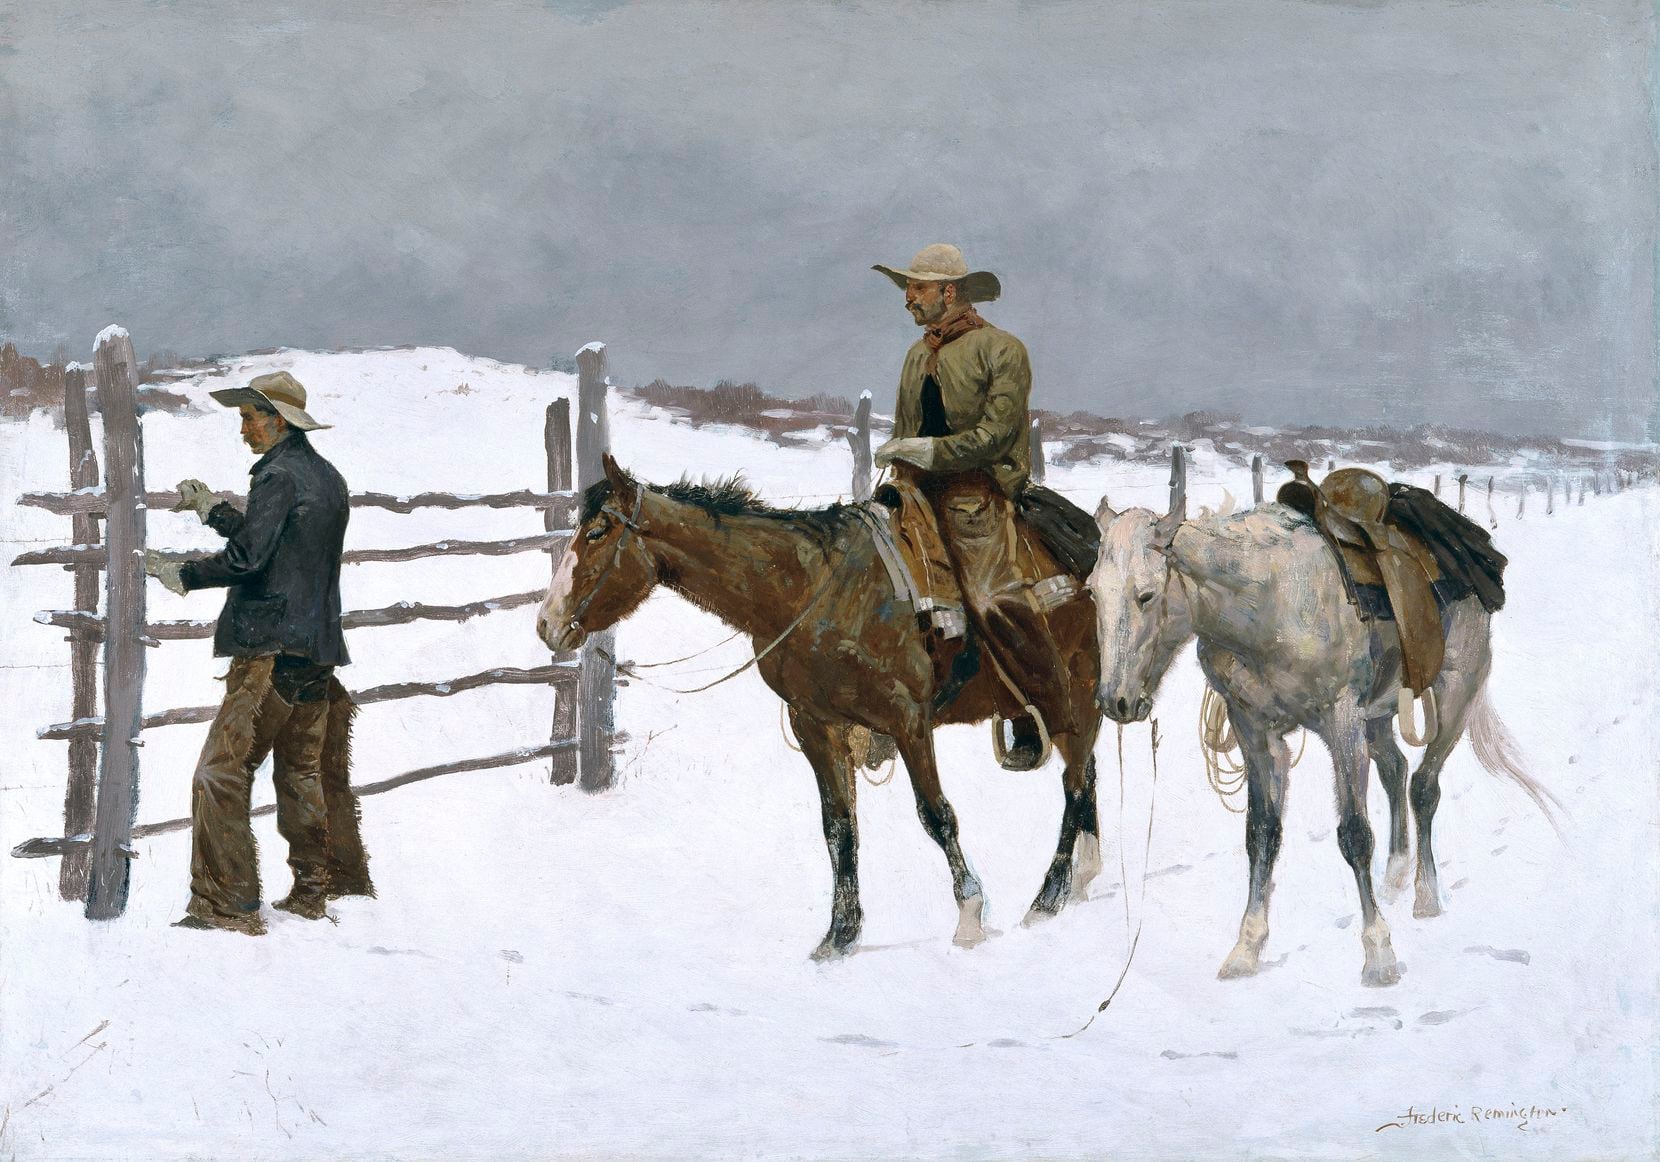 "The Fall of the Cowboy," an 1895 oil-on-canvas painting by Frederic Remington, is among the artist's many works depicting men in action on the Western plains. 
